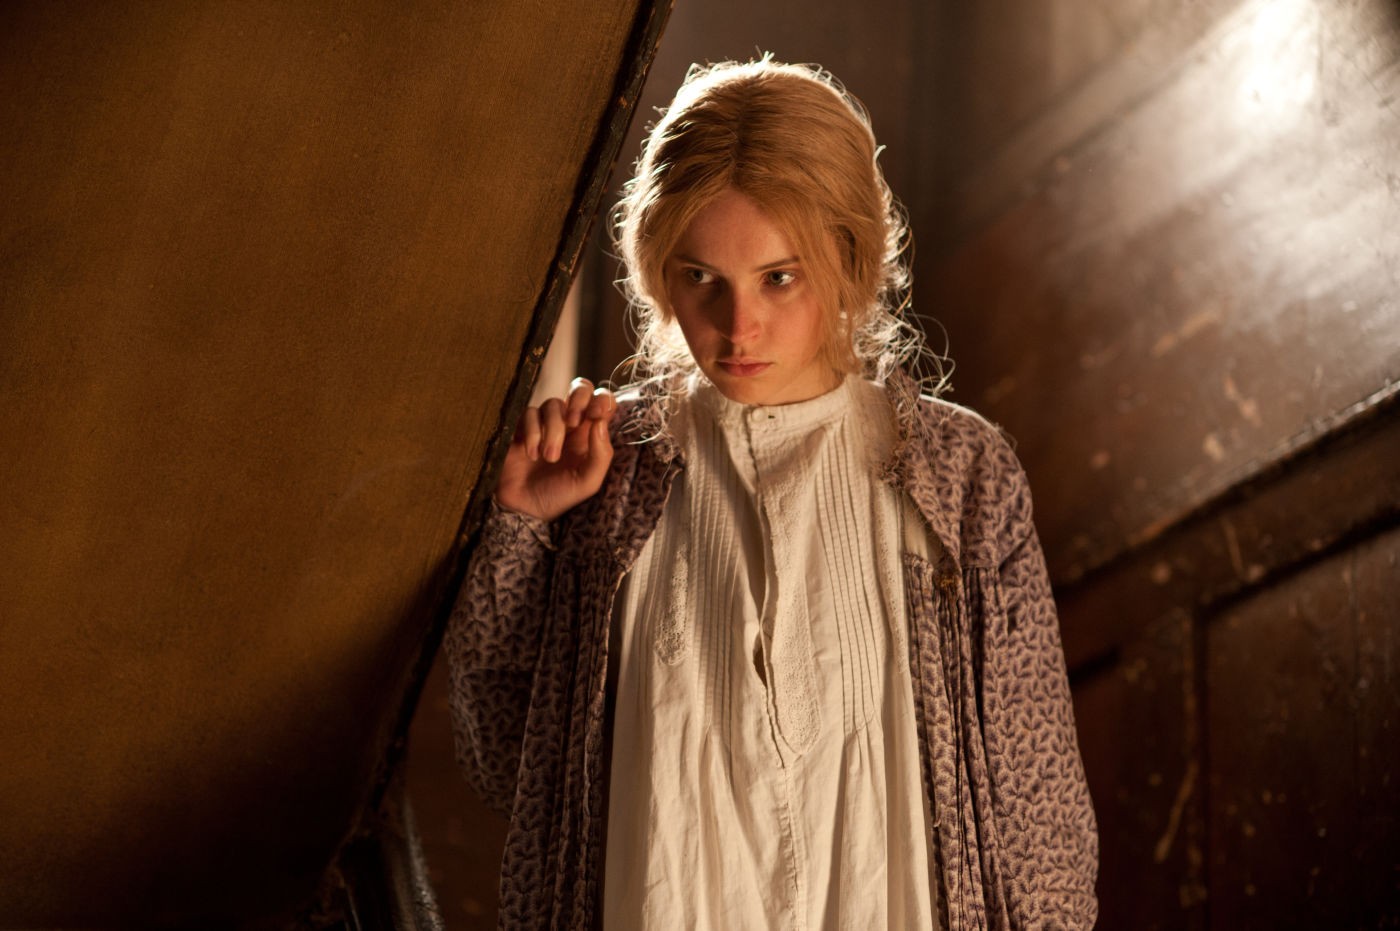 Felicity Jones stars as Nelly Ternan in Sony Pictures Classics' The Invisible Woman (2013). Photo credit by David Appleby.